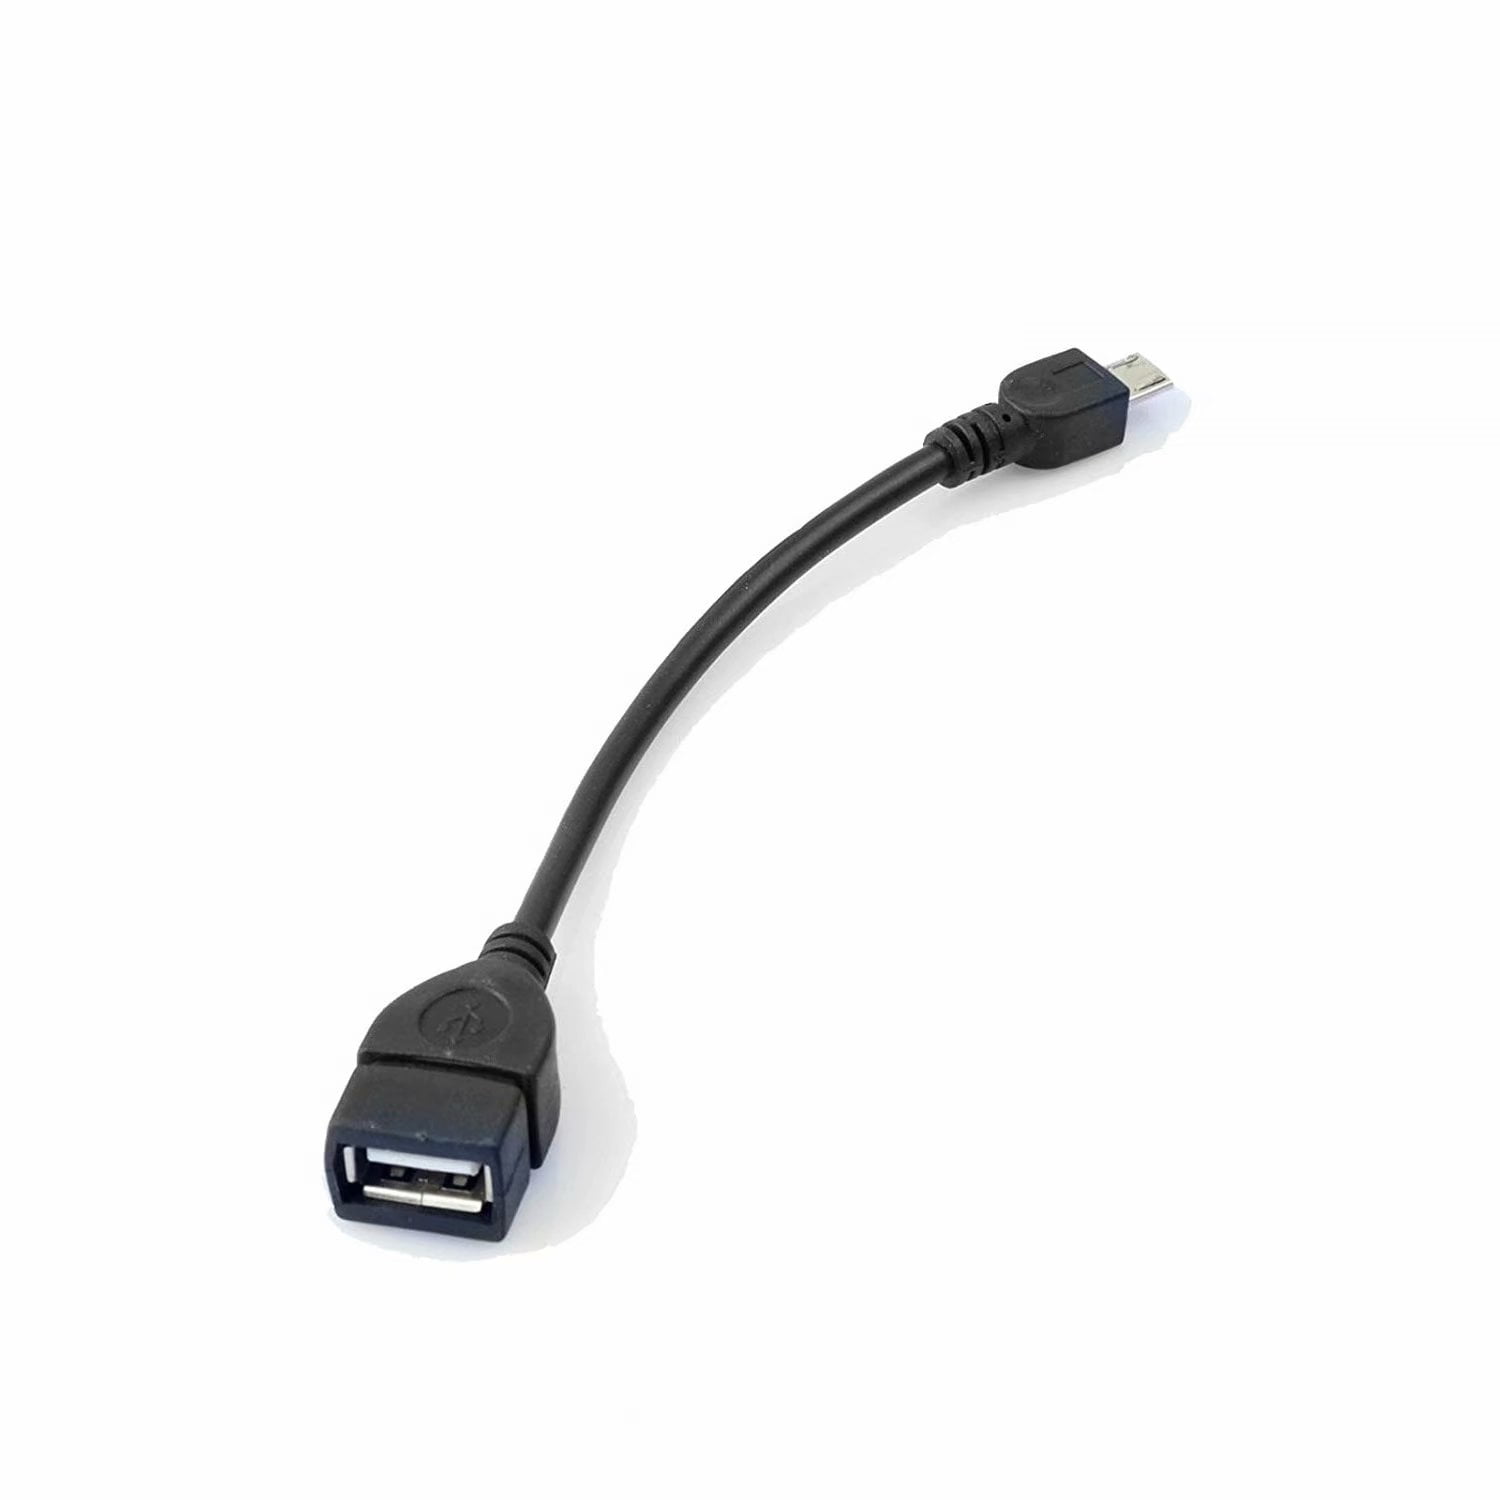 Black Celkon S1 Micro-USB to USB 2.0 Right Angle Adapter for High Speed Data-Transfer Cable for connecting any compatible USB Accessory/Device/Drive/Flash/and truly On-The-Go! OTG 